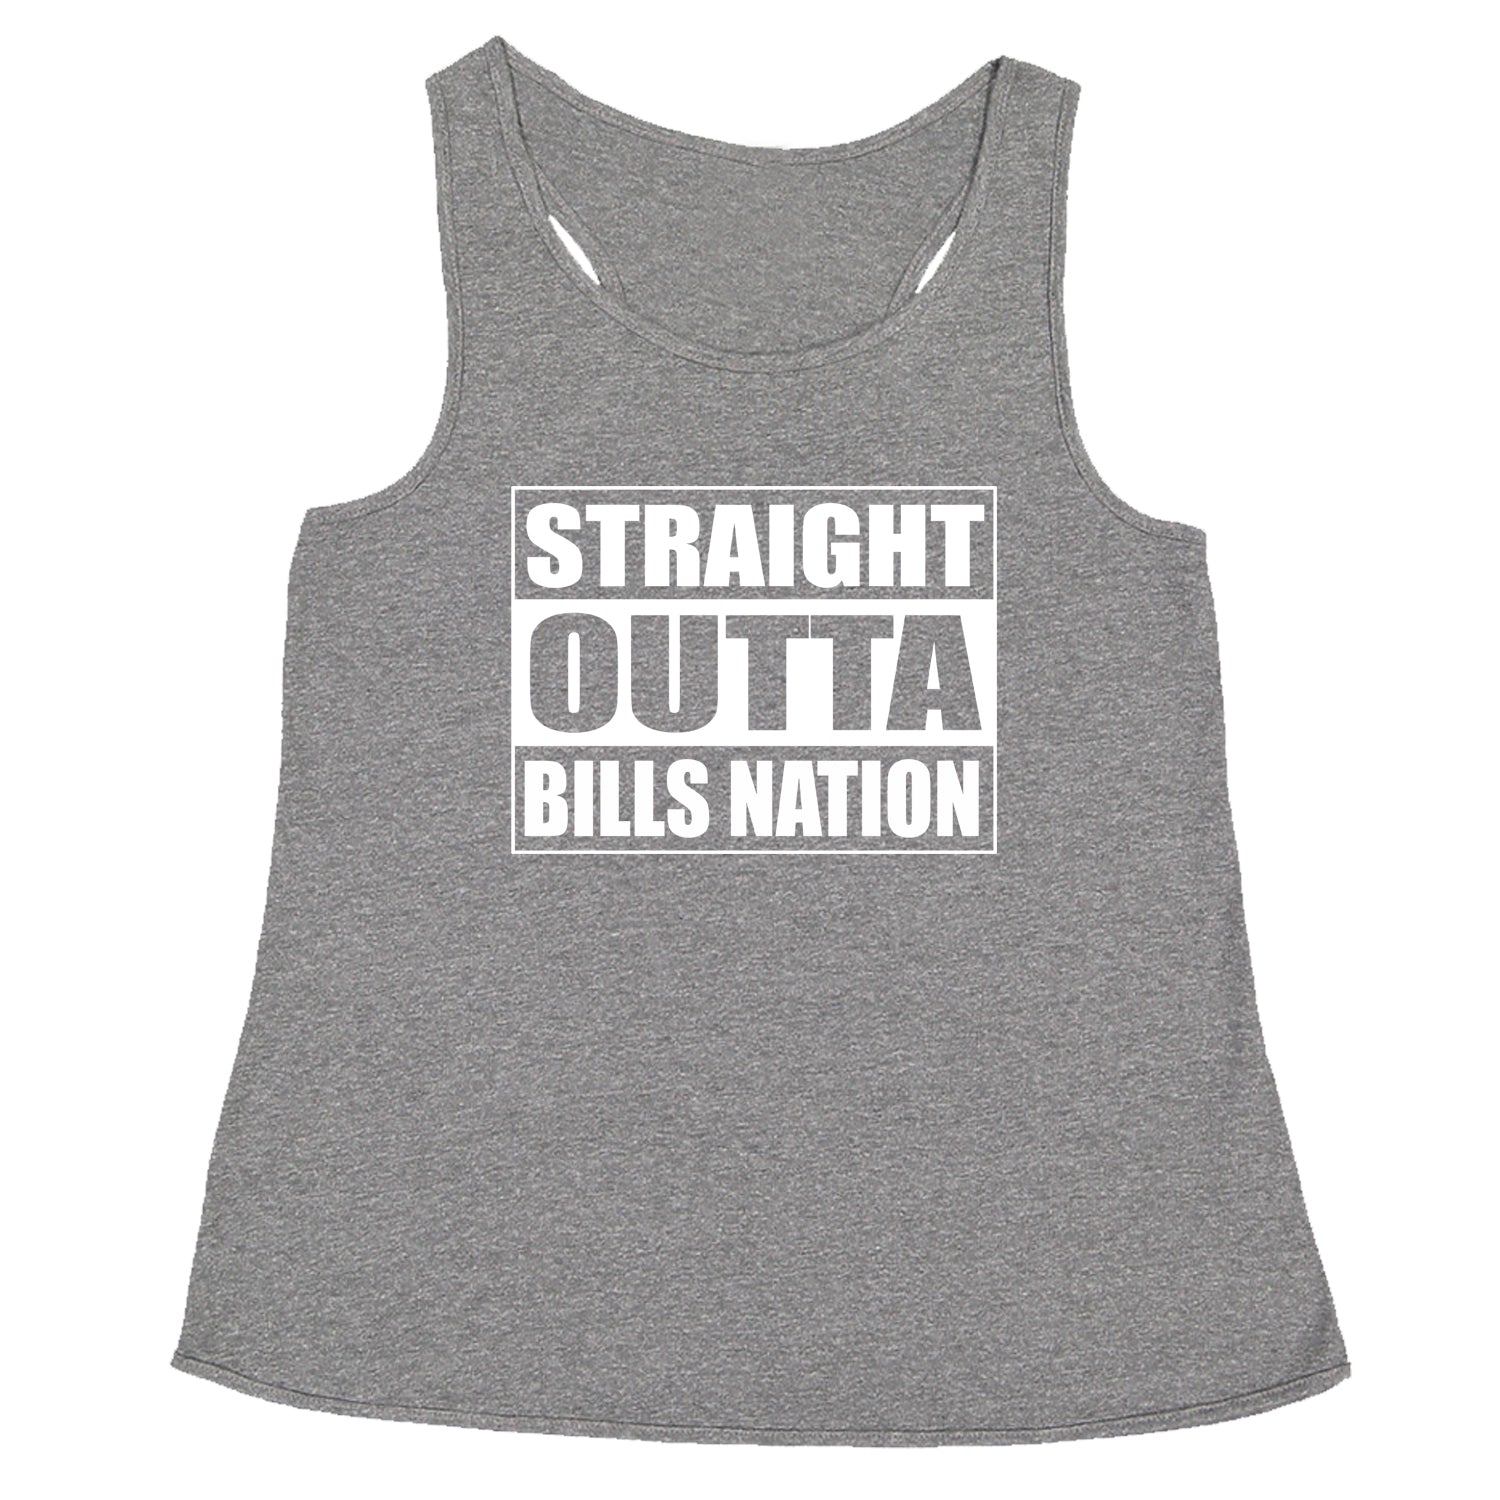 Straight Outta Bills Nation Racerback Tank Top for Women bills, buffalo, football, new, york by Expression Tees